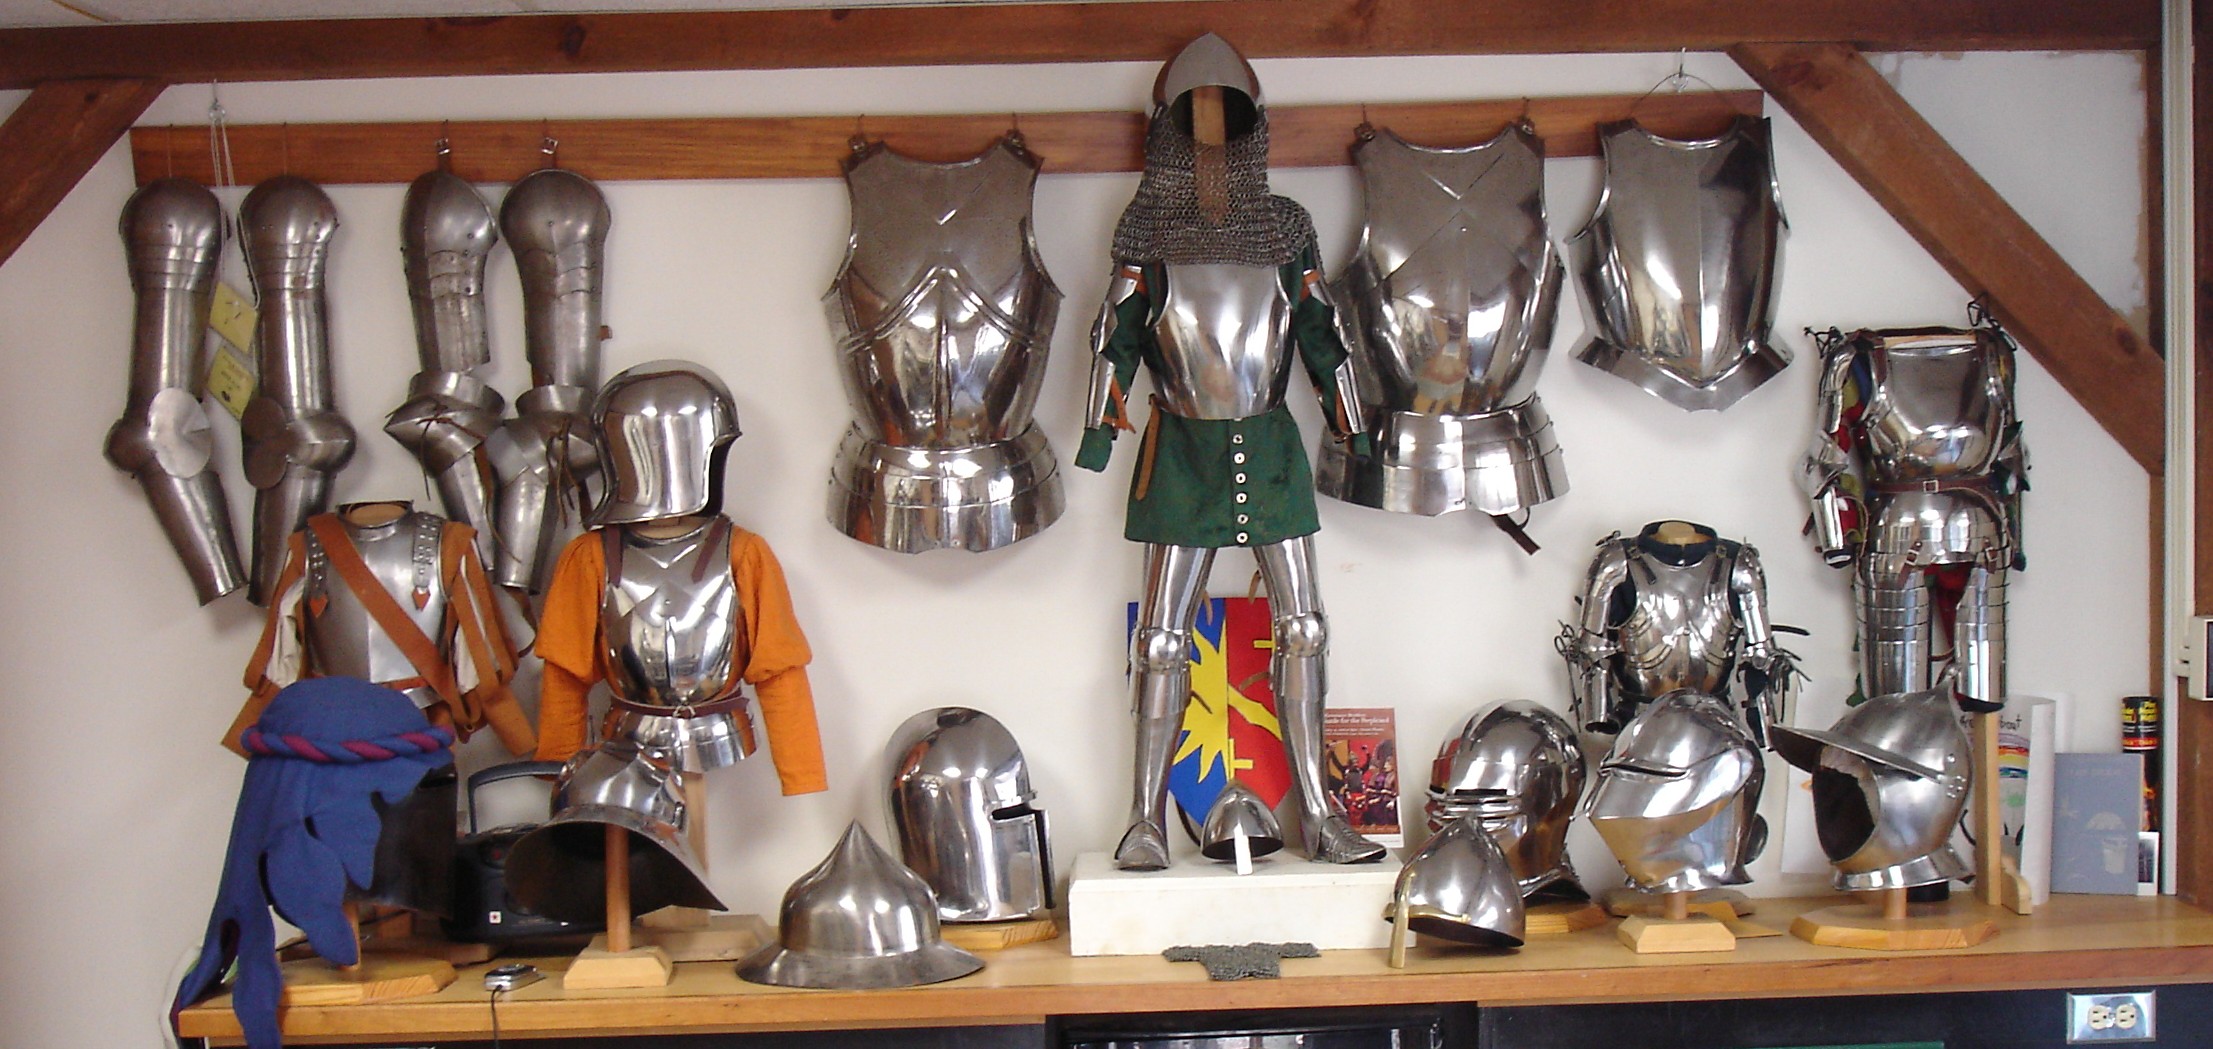 armor hanging on the wall